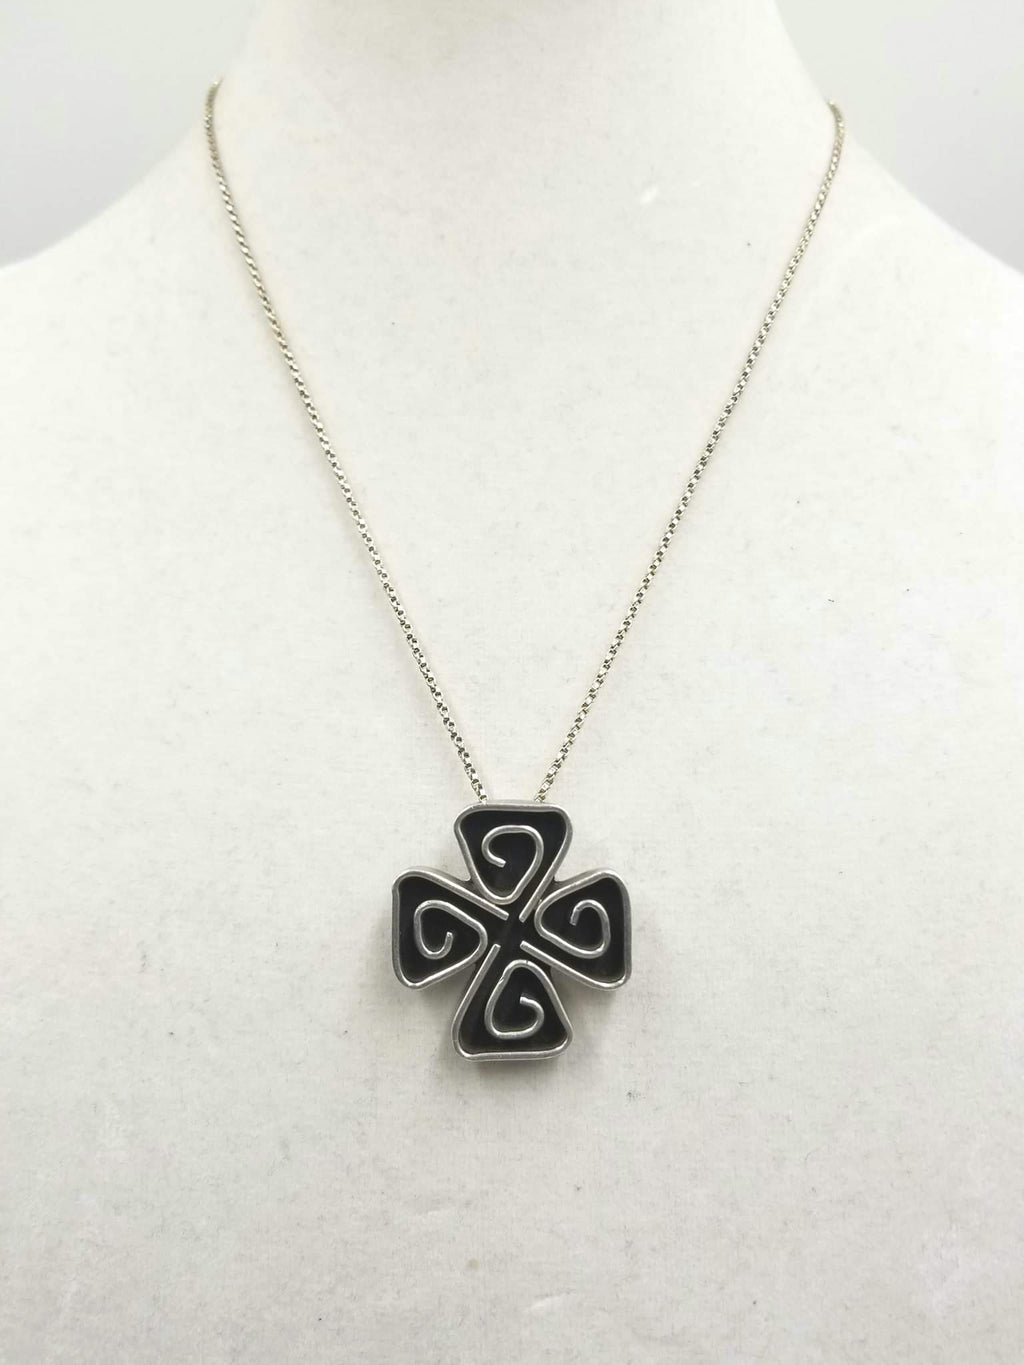 Past Work. Heavy sterling silver Celtic stylized shamrock pendant necklace. 19 in Matinee Length. SOLD.